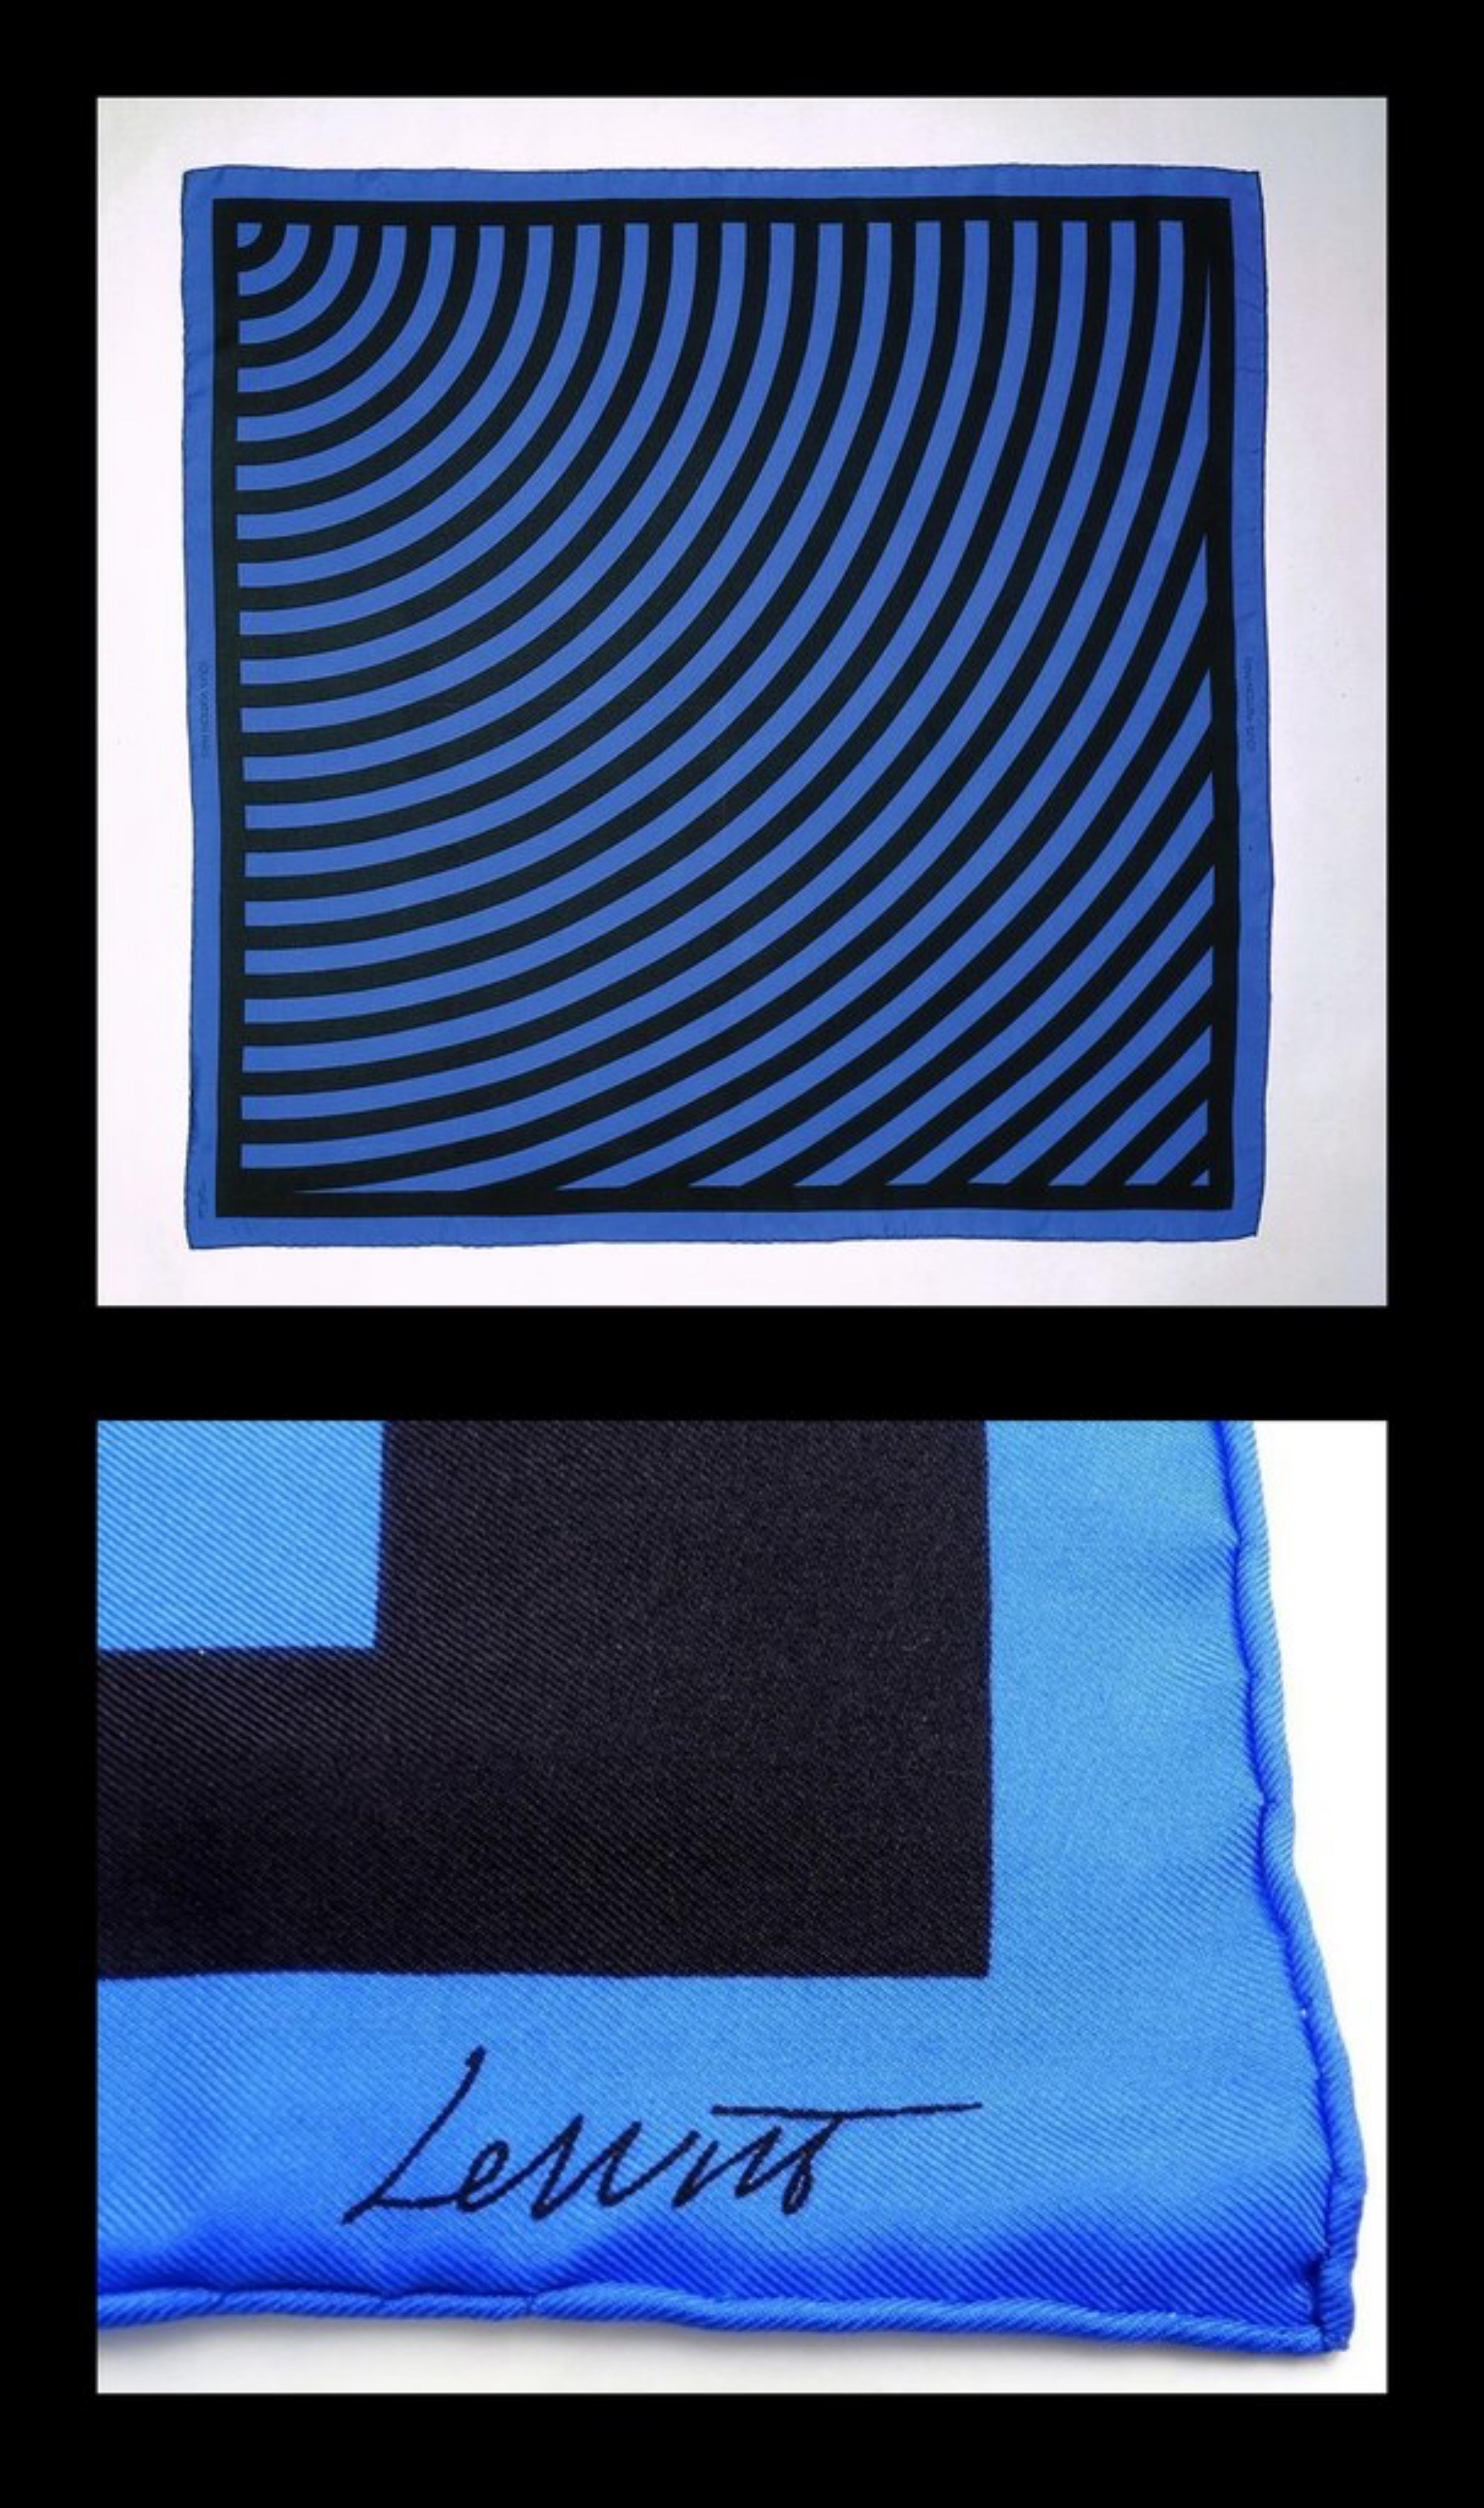 Limited Edition of 240 Geometric Abstraction Louis Vuitton 100% Silk Scarf  - Abstract Geometric Mixed Media Art by Sol LeWitt